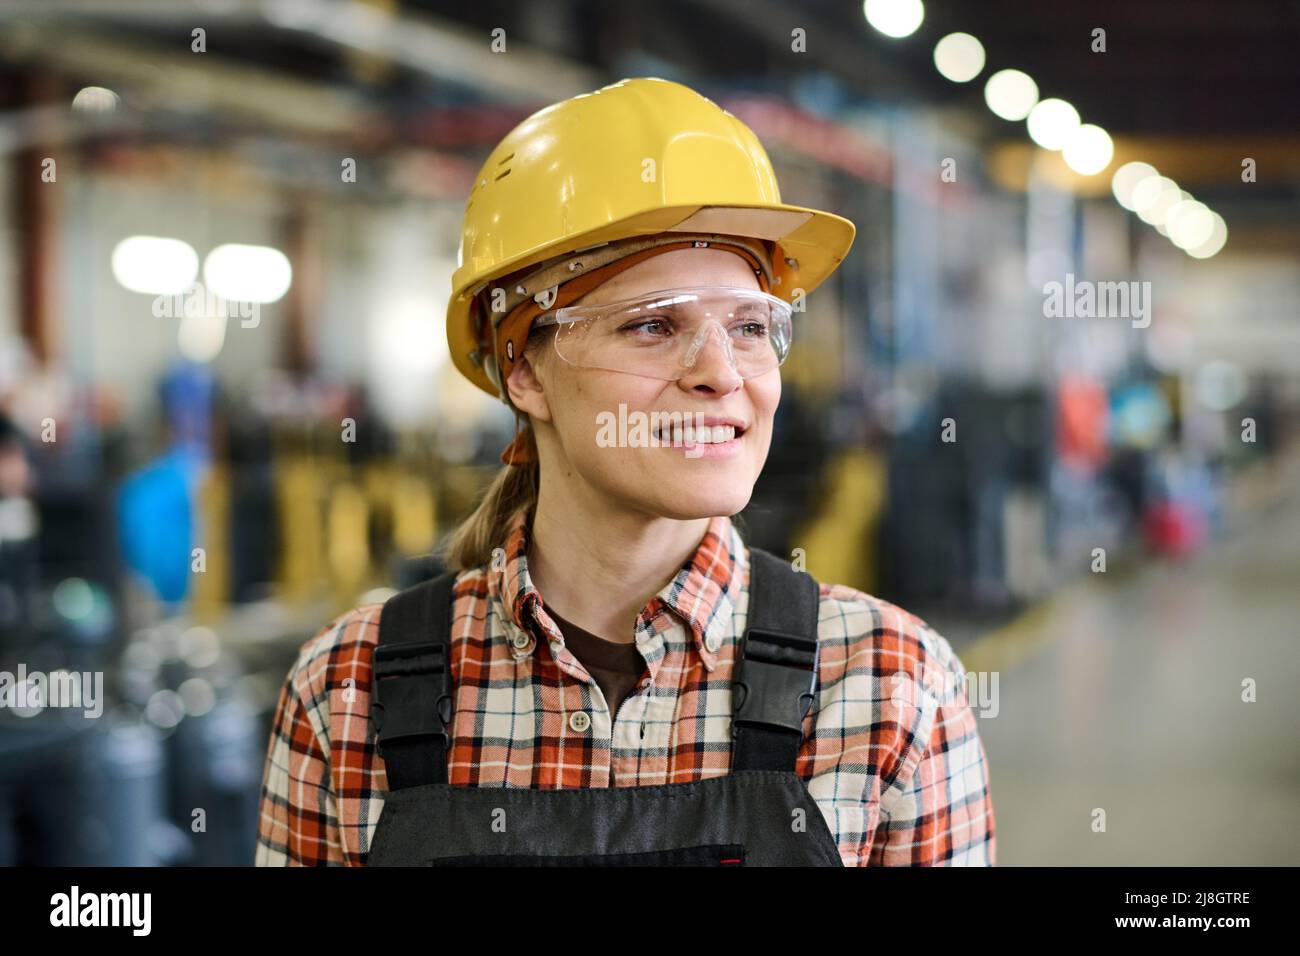 Happy young female engineer in hardhat and coveralls standing in workshop or warehouse of factory with industrial equipment Stock Photo